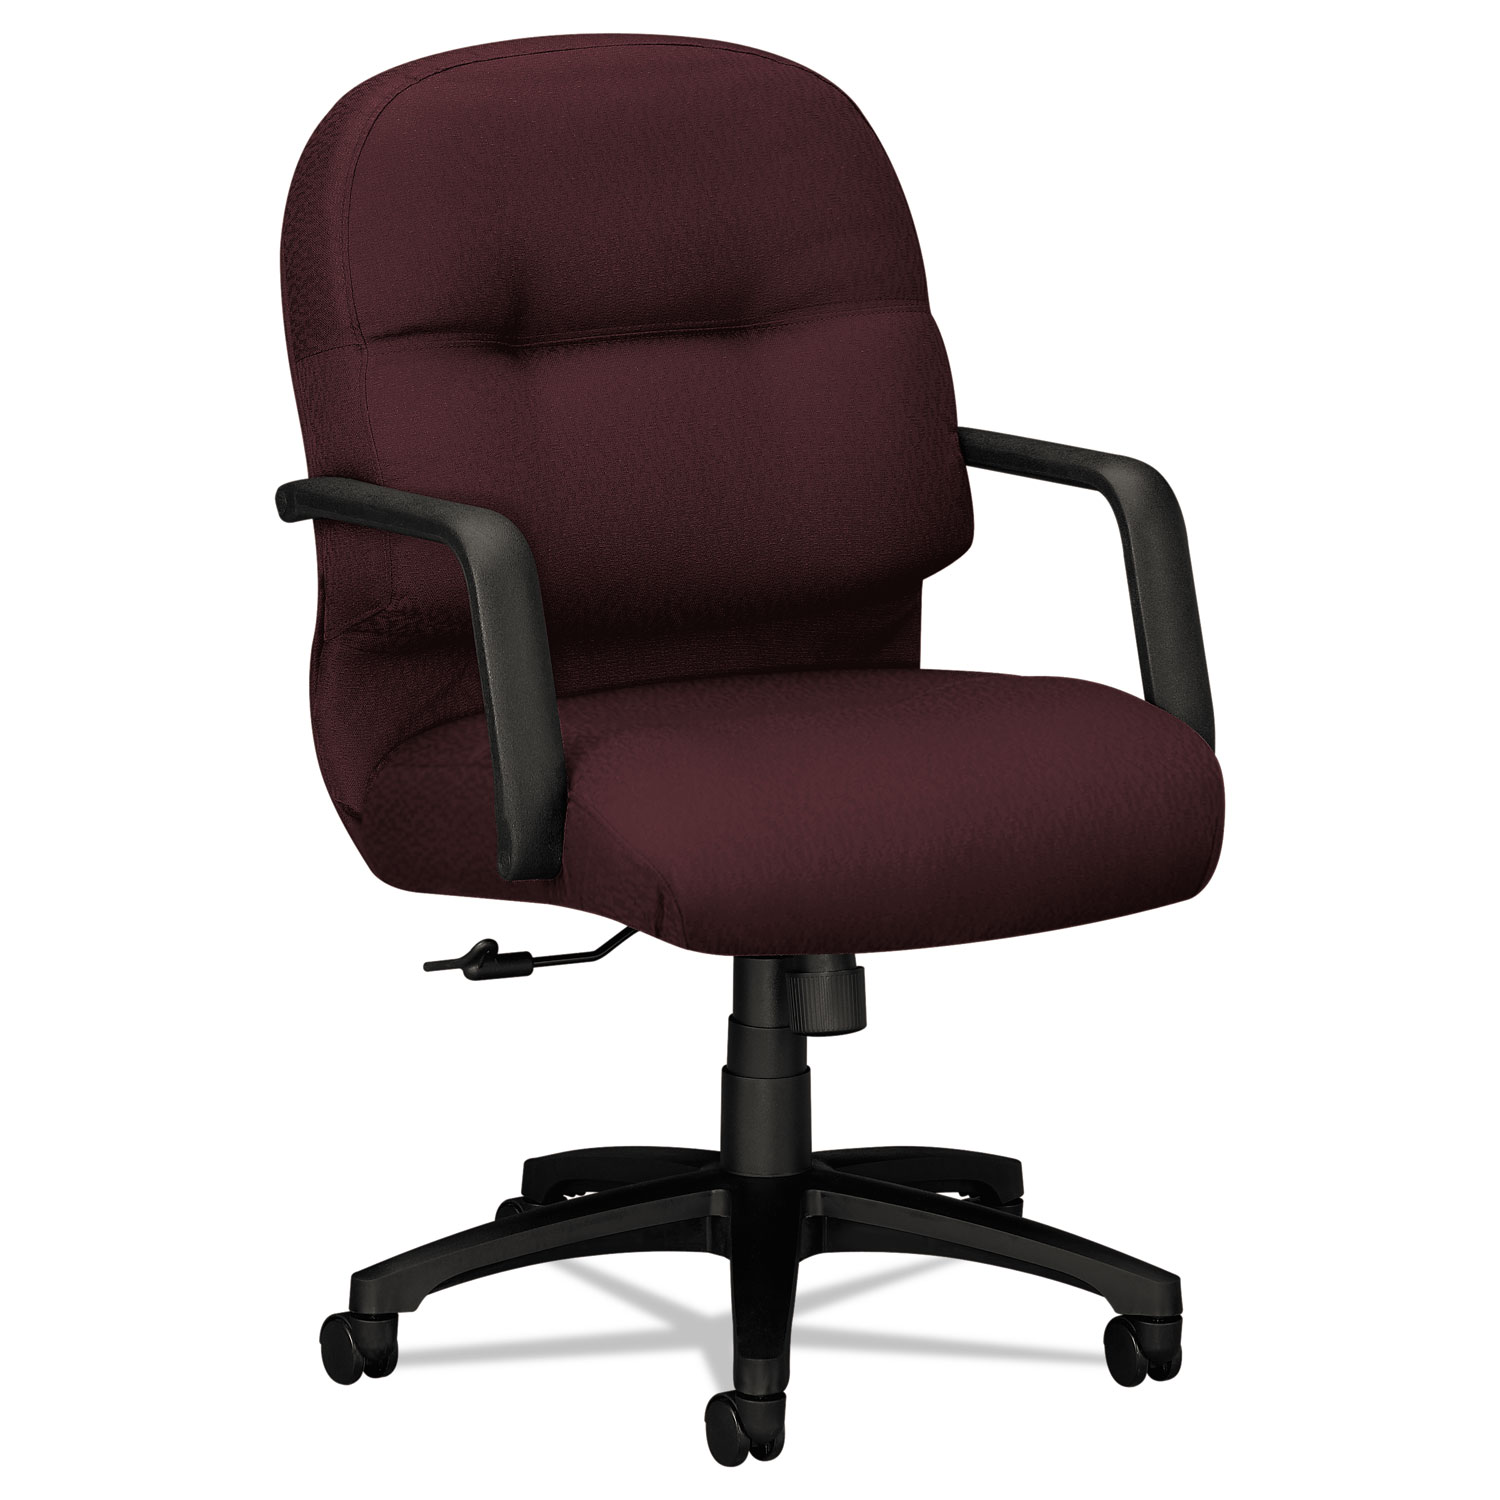 2090 Pillow-Soft Series Managerial Mid-Back Swivel/Tilt Chair, Wine Fabric/Black